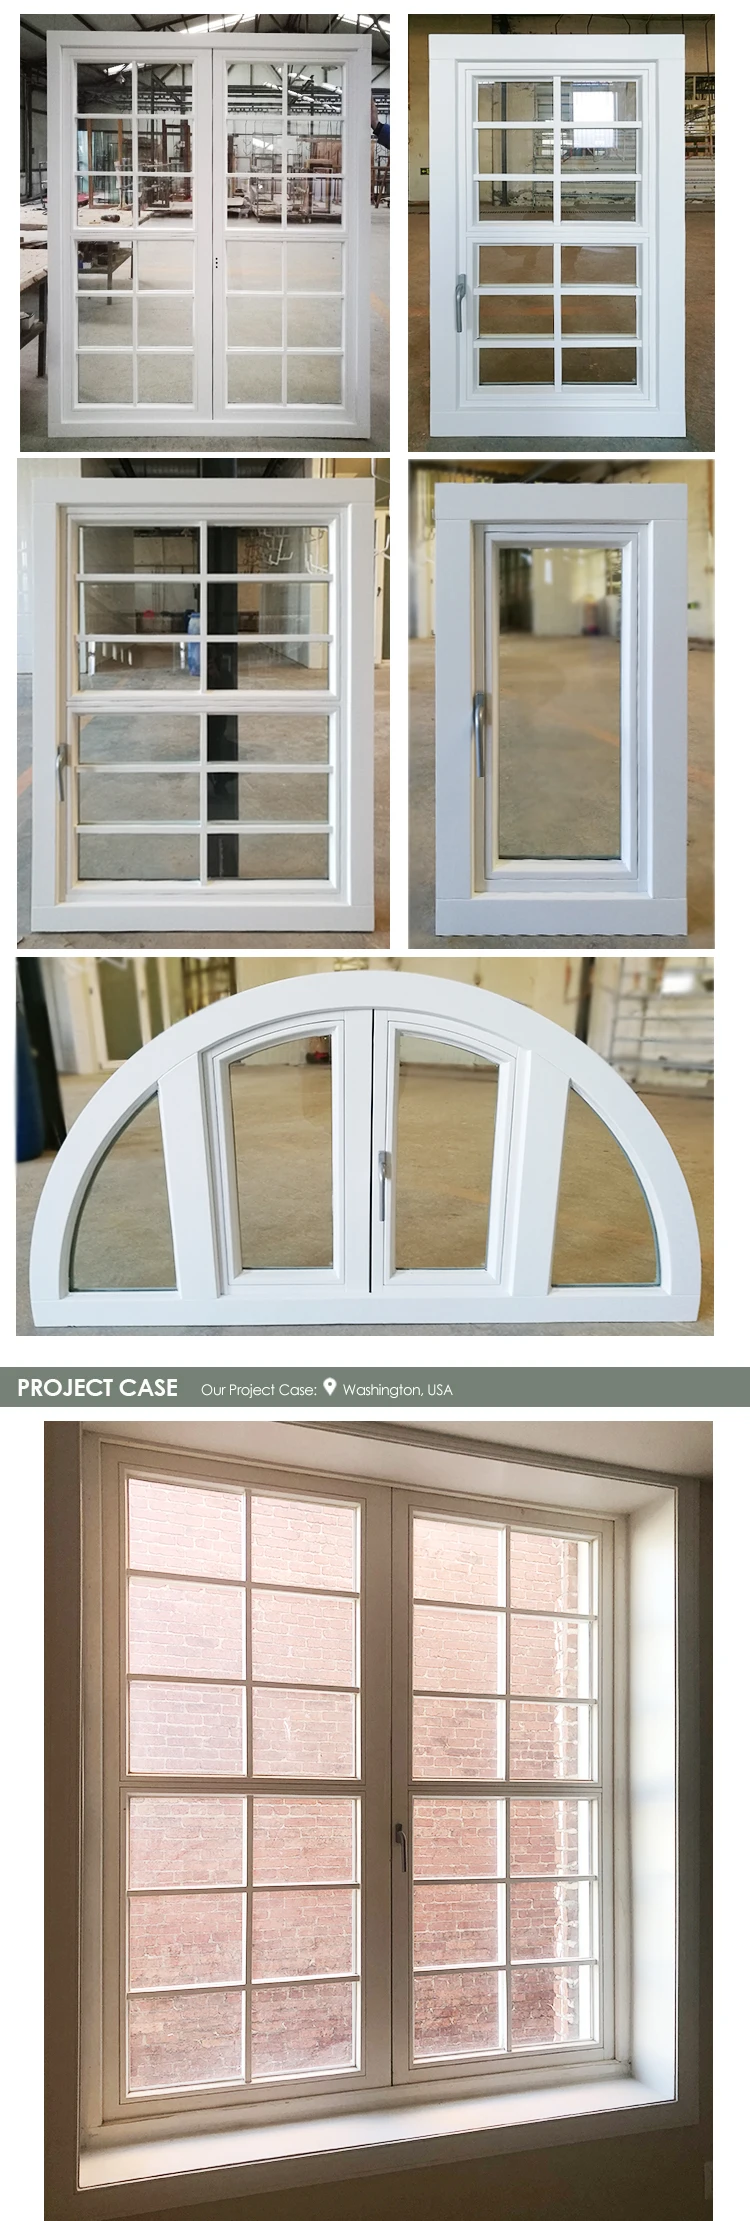 Chicago passive real wood  french grill Modern Design American Casement Aluminum Clad wood windows